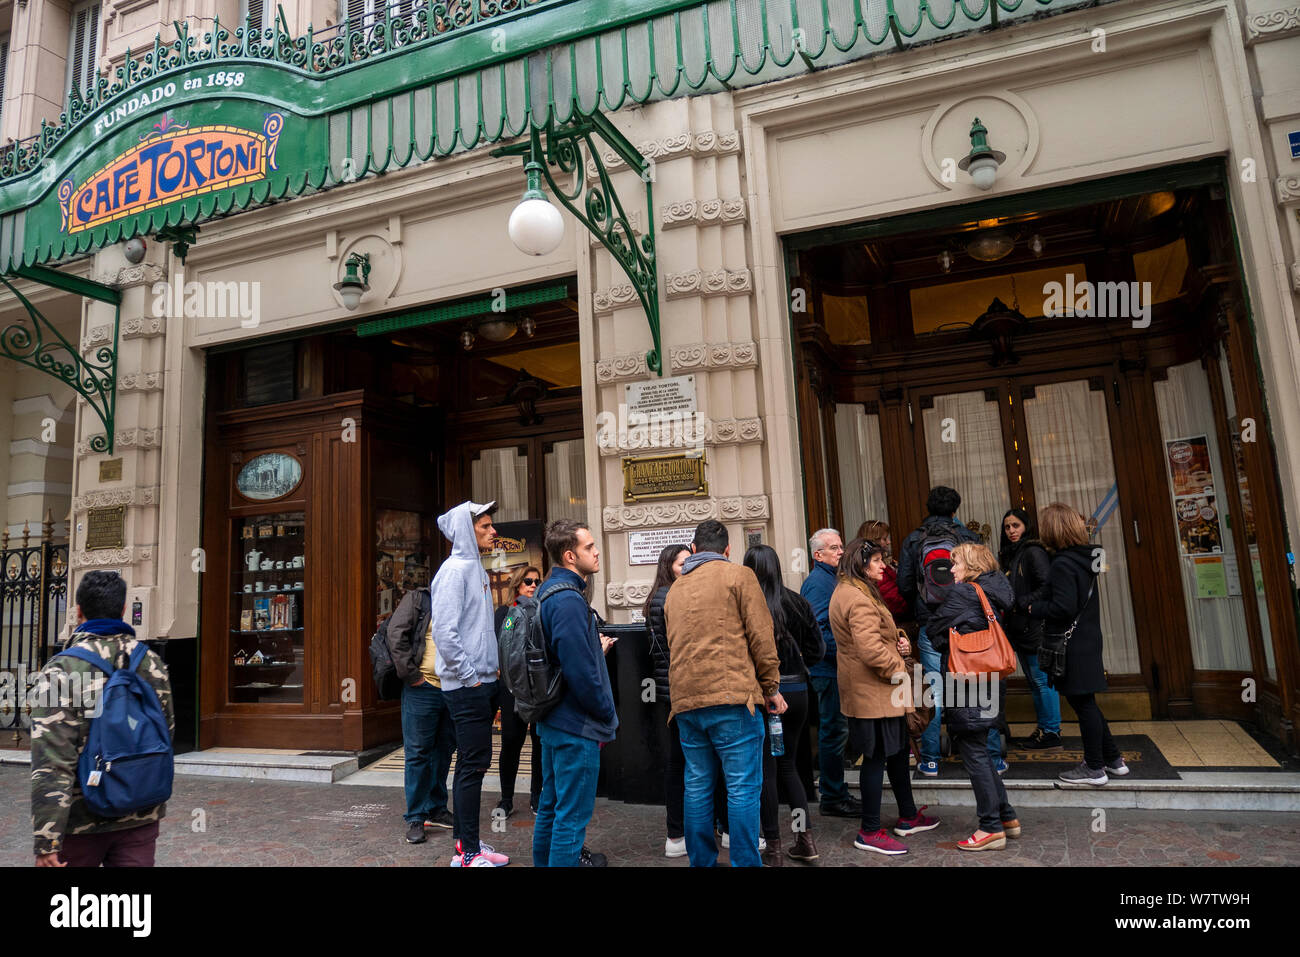 Buenos Aires, August 1, 2019. Crisis in Argentina. People queue up looking for work at the traditional Tortoni bar. Stock Photo